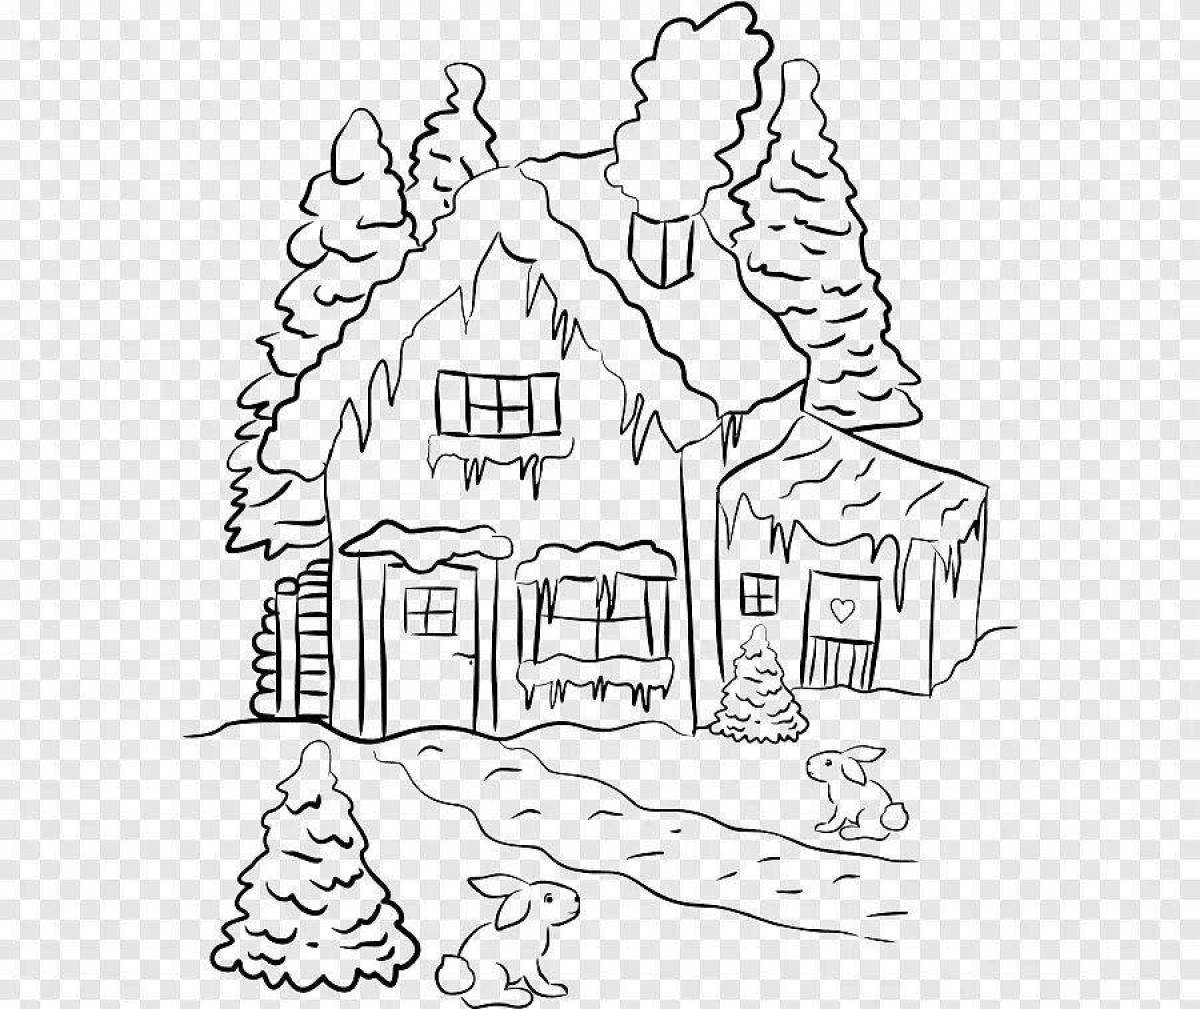 Coloring book luxury winter house